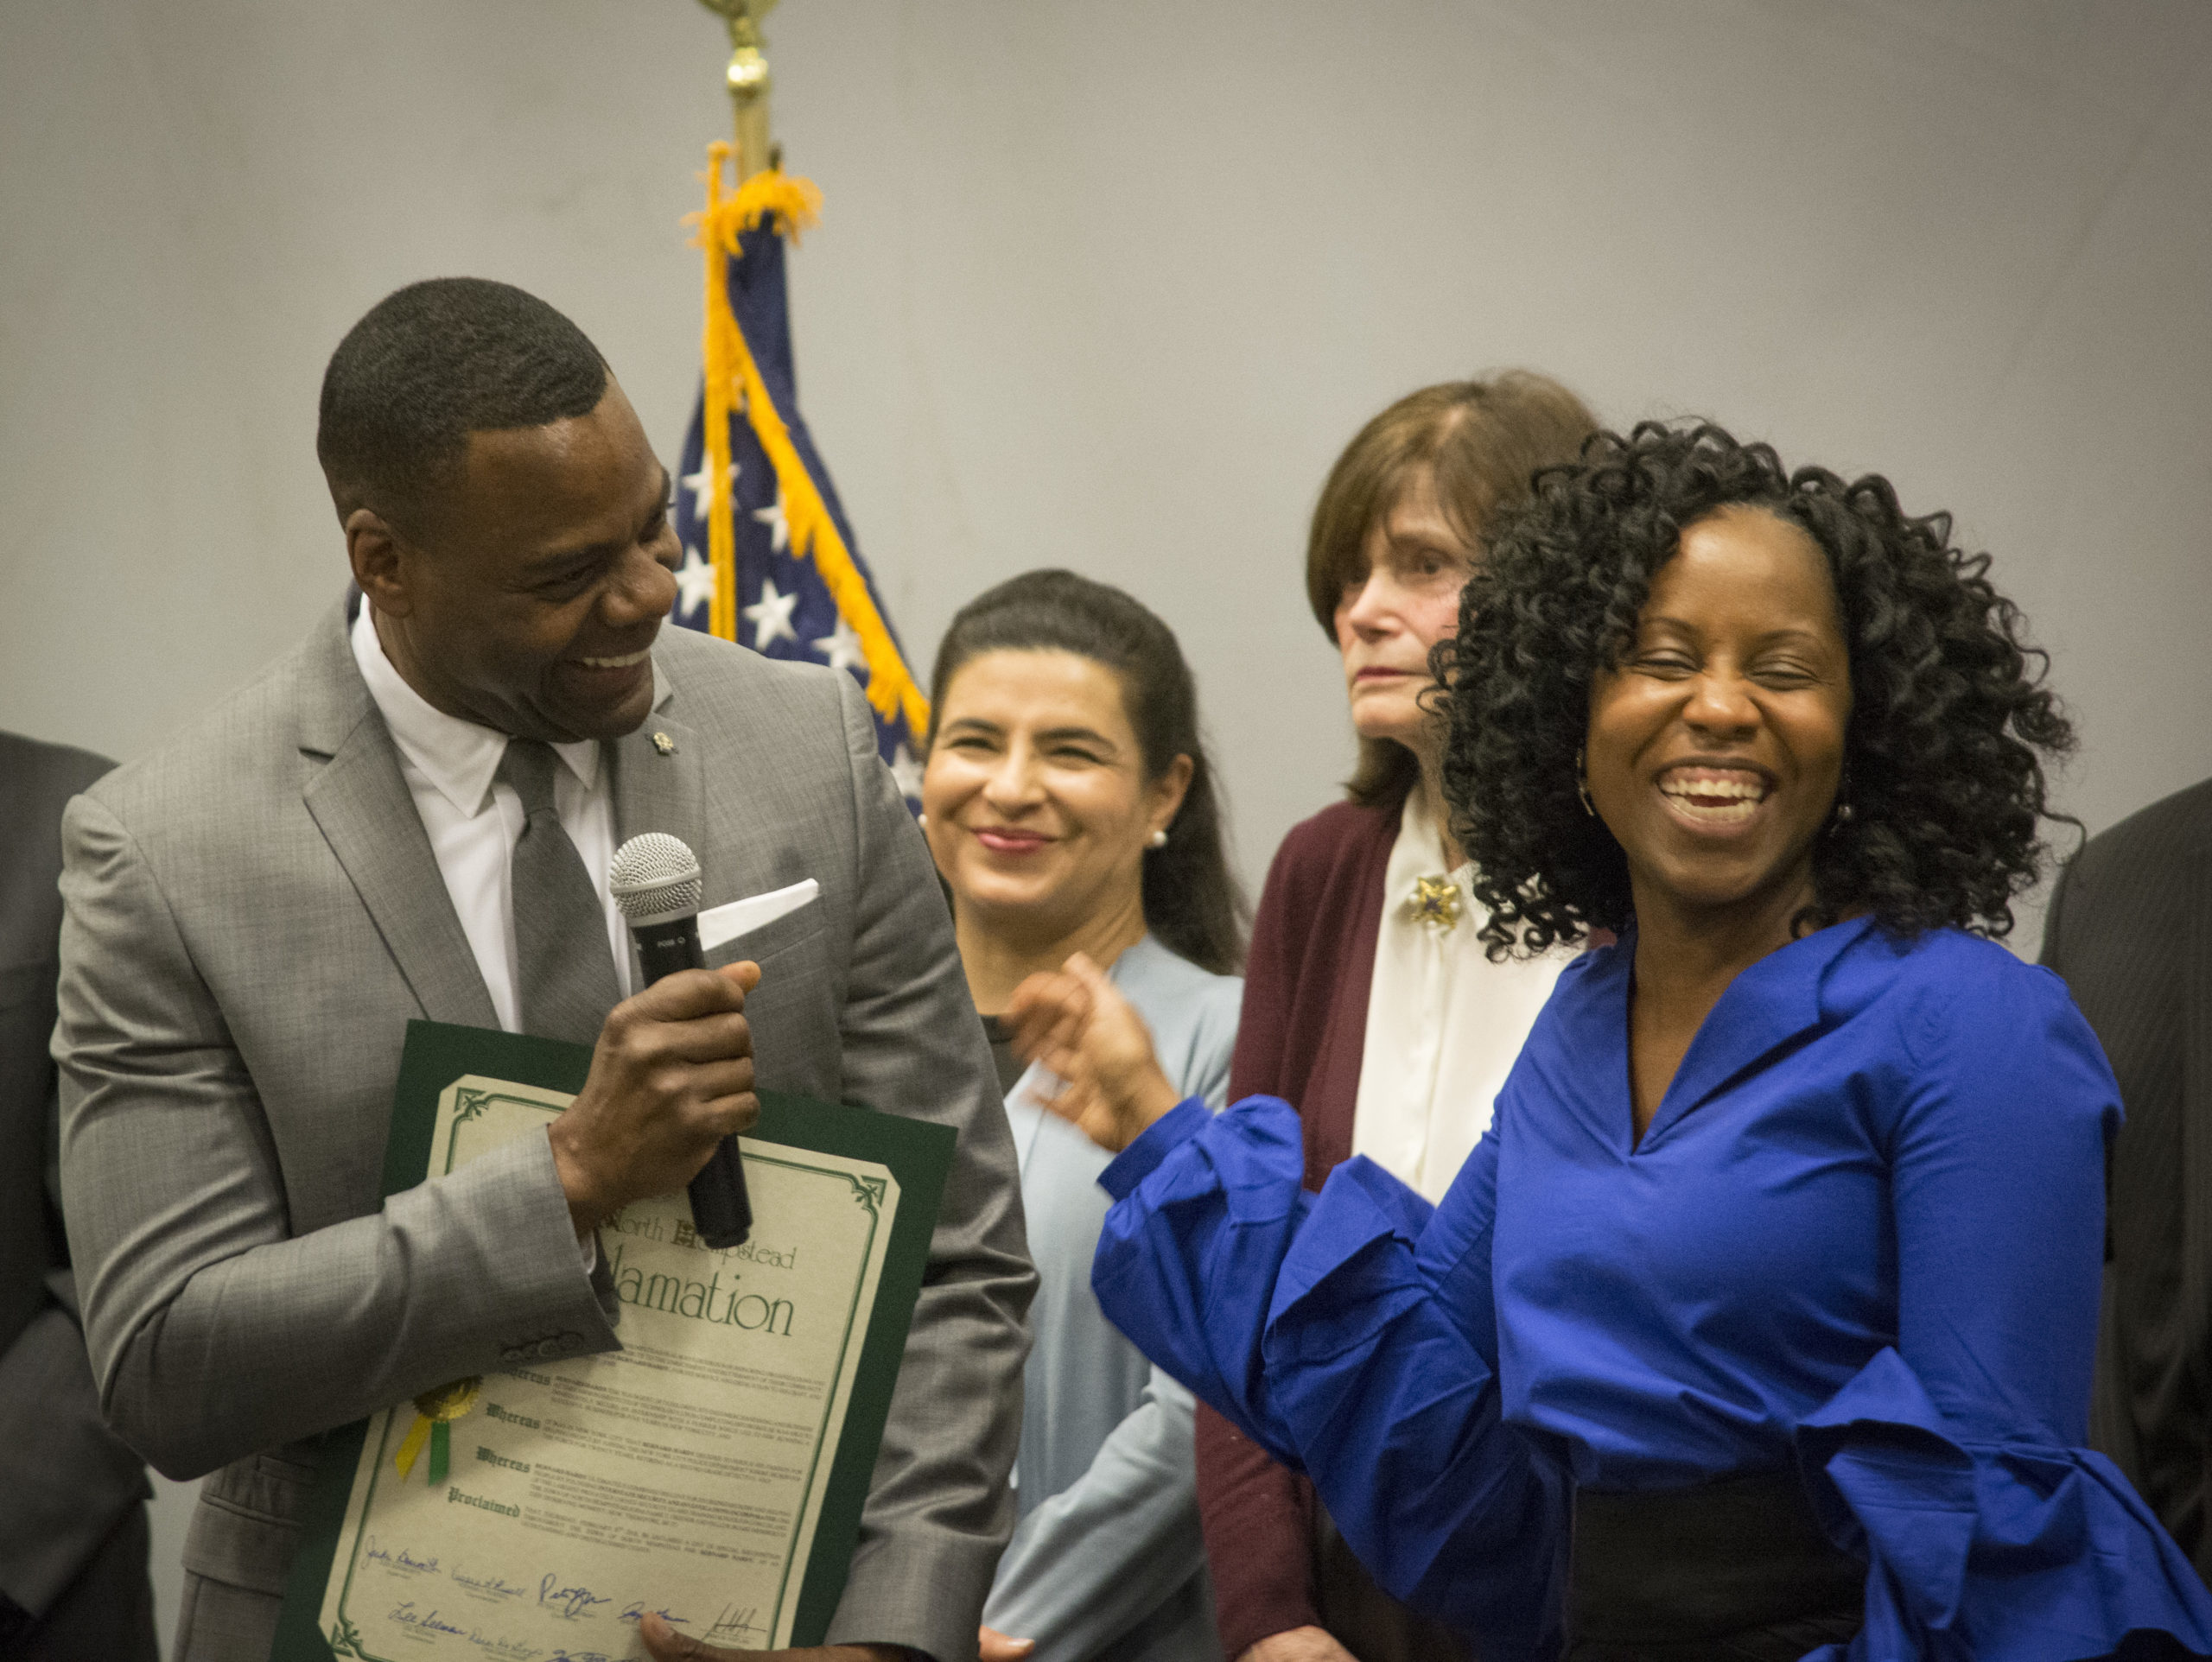 Councilwoman Viviana Russell, who represents Old Westbury and other parts of North Hempstead, shares a laugh with an honoree. (Photo by Janelle Clausen)